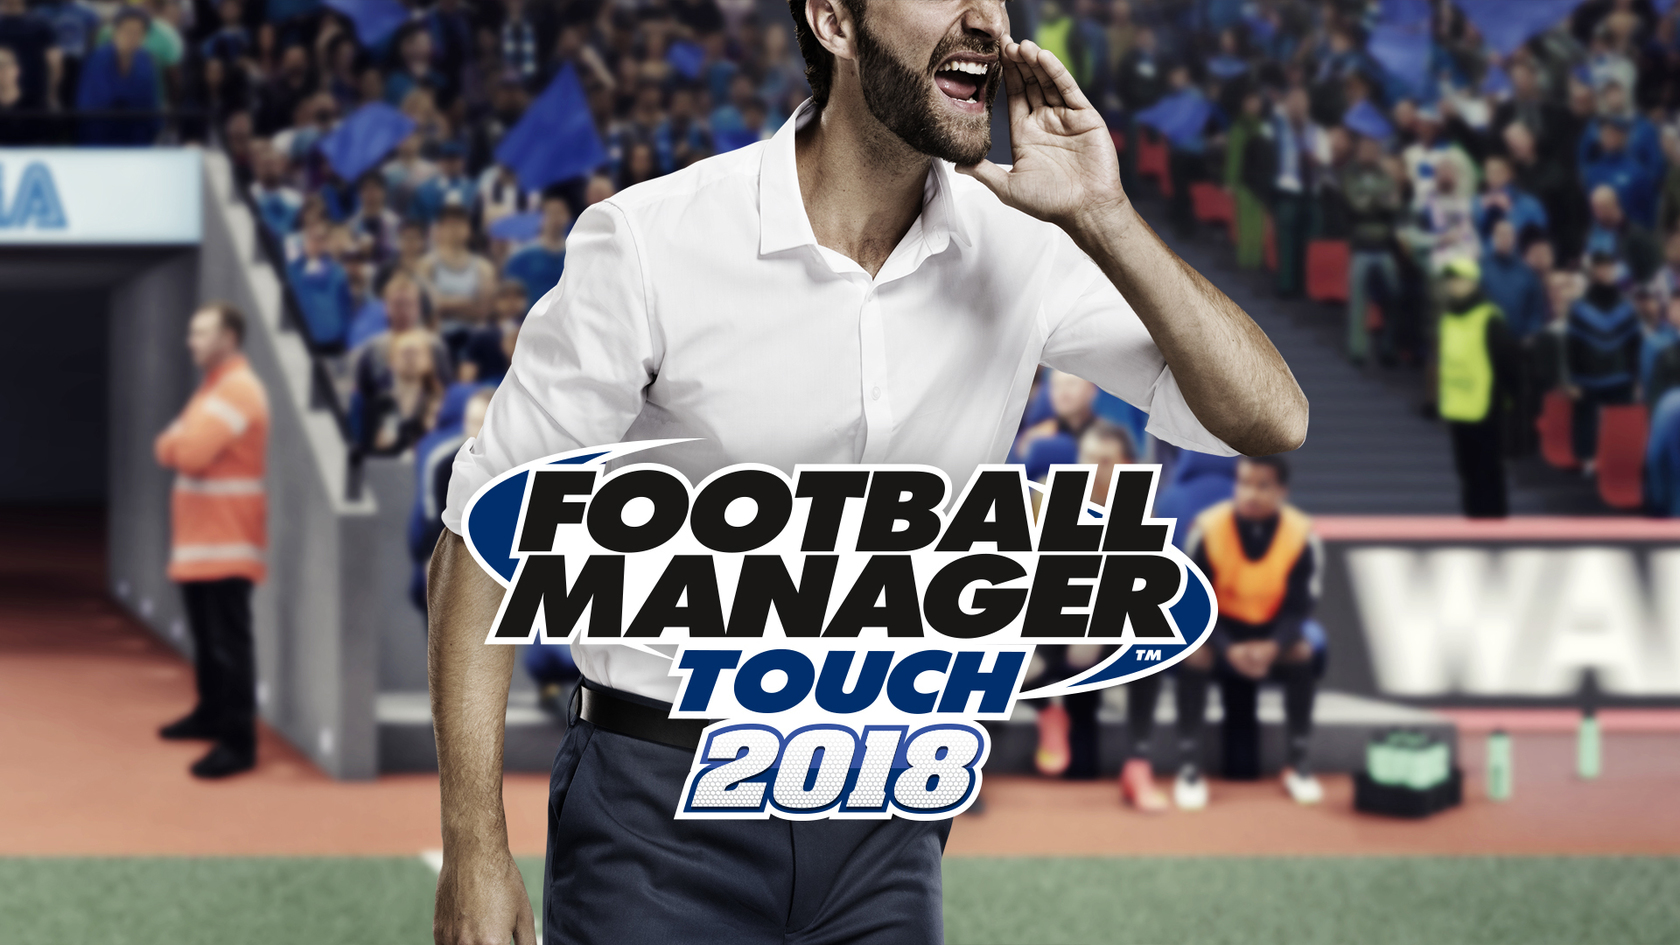 football manager touch 2018 download